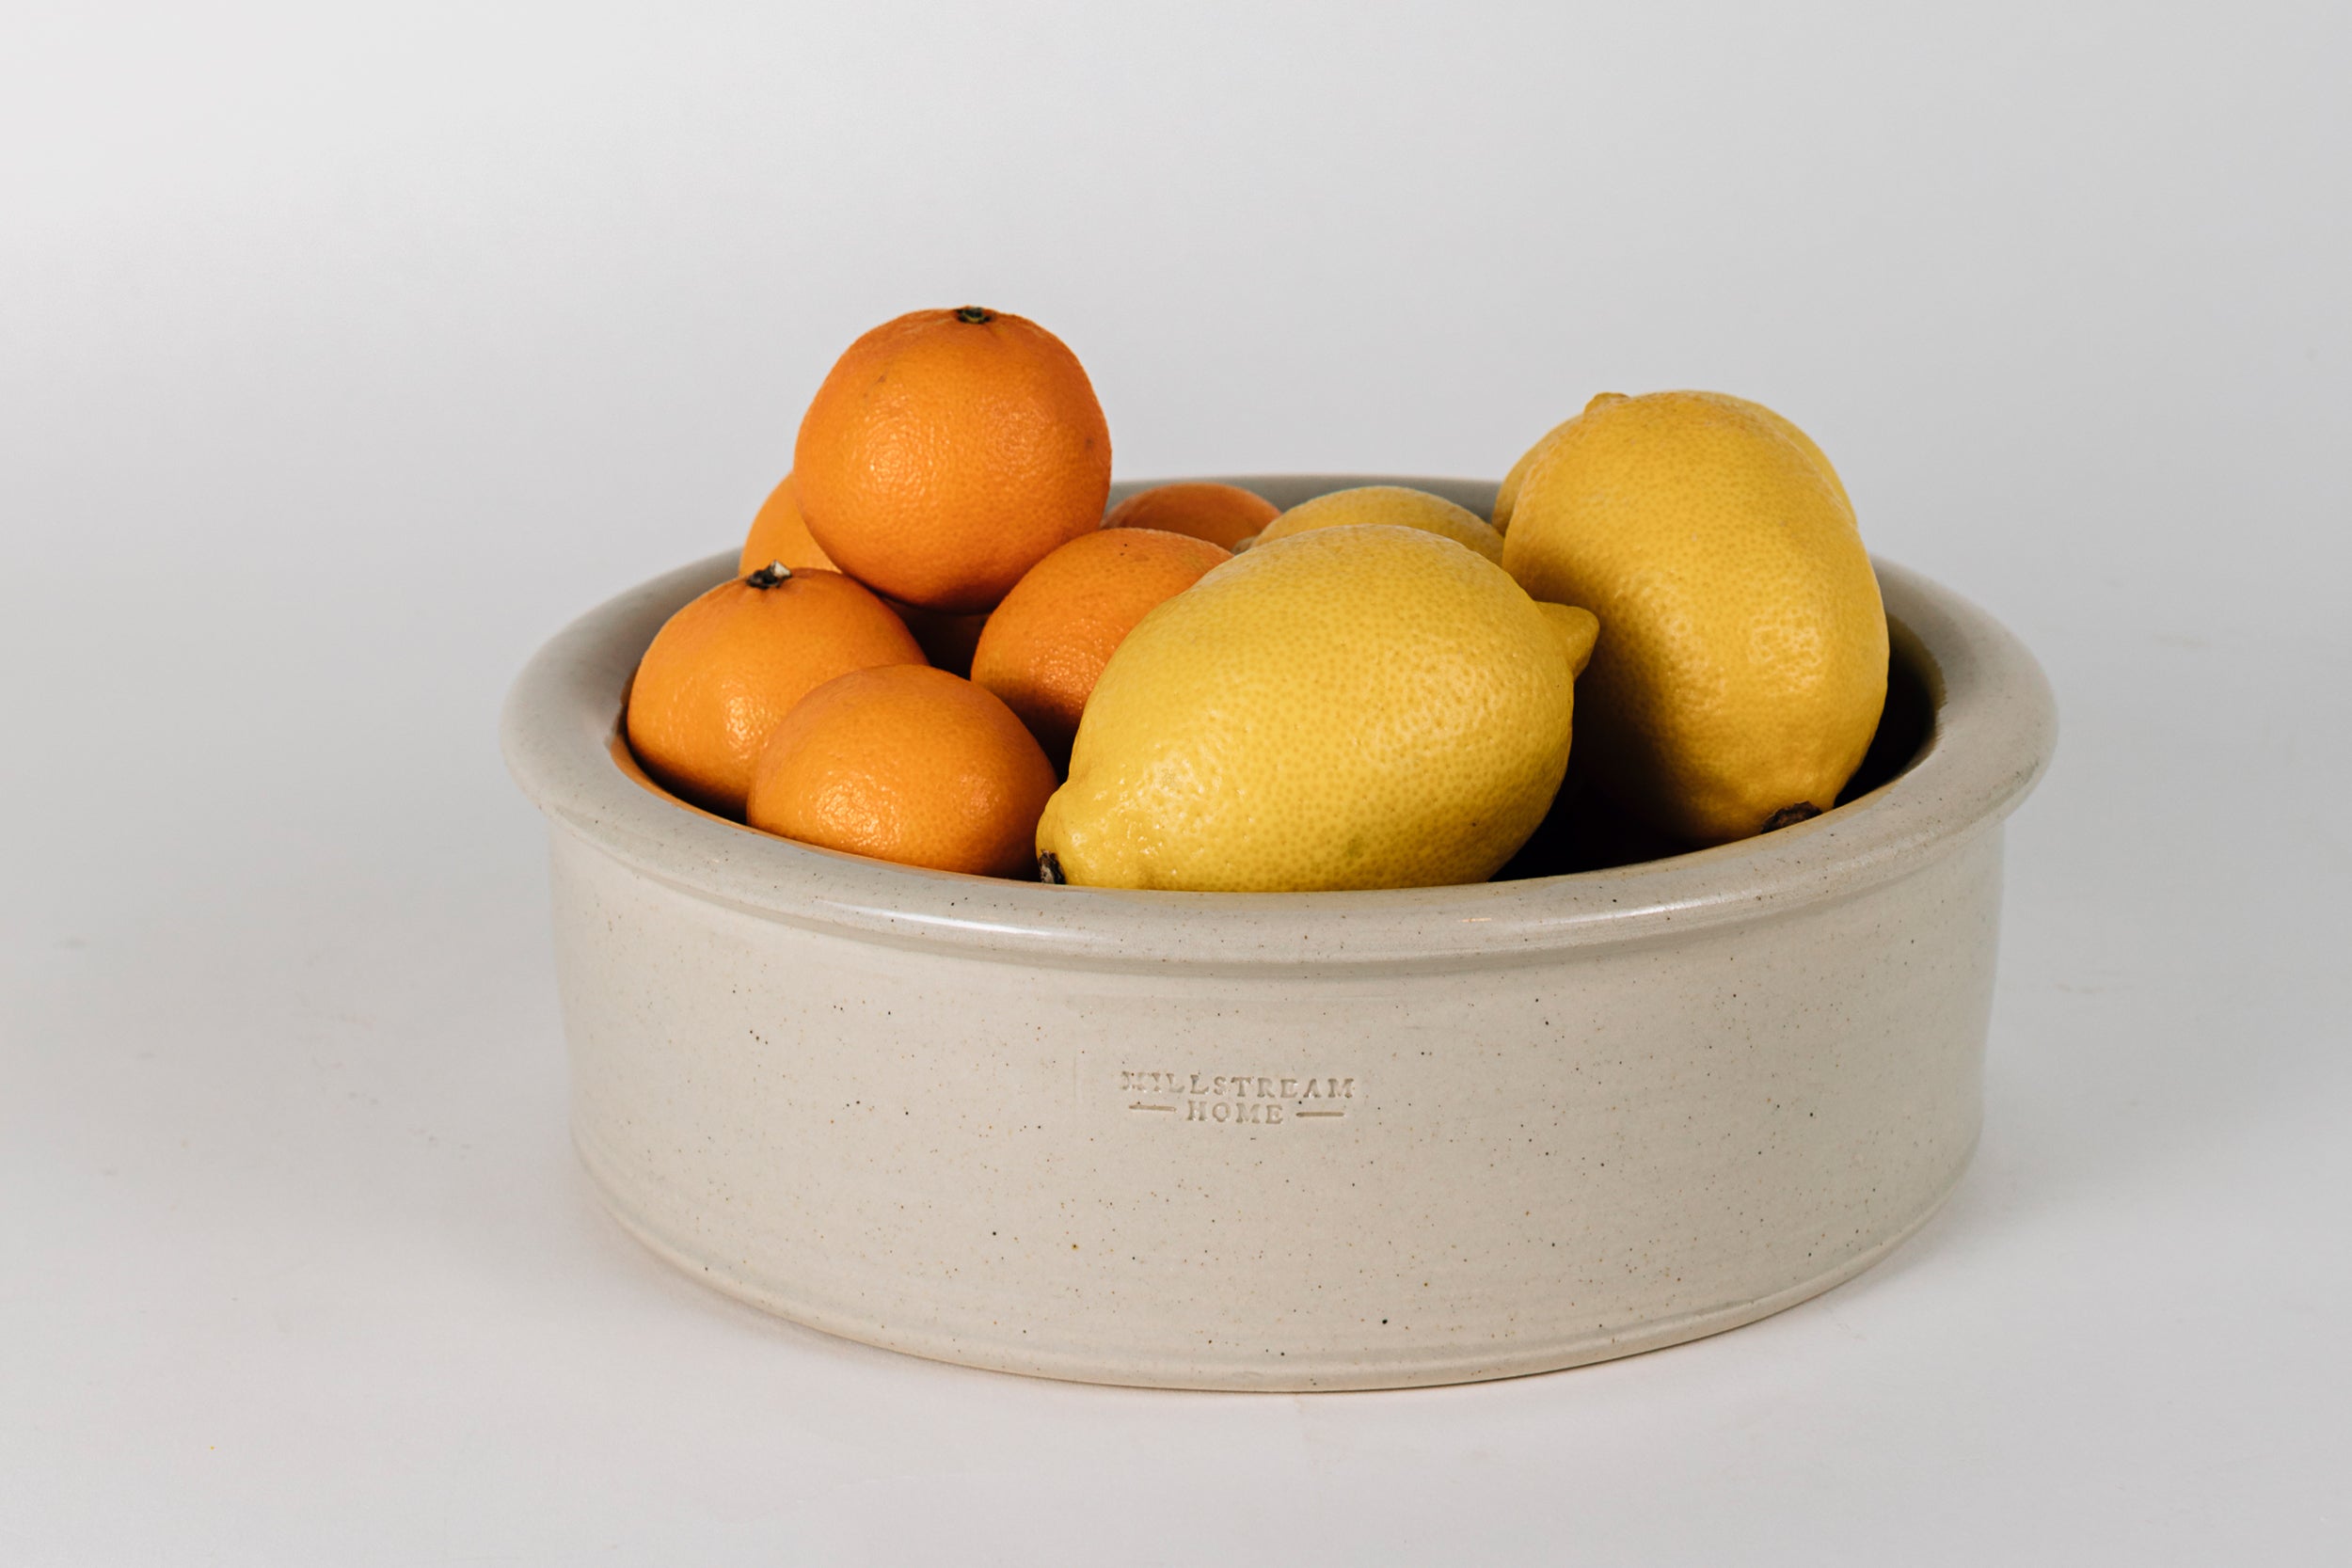 The Anything Bowl Holding Citrus Fruits